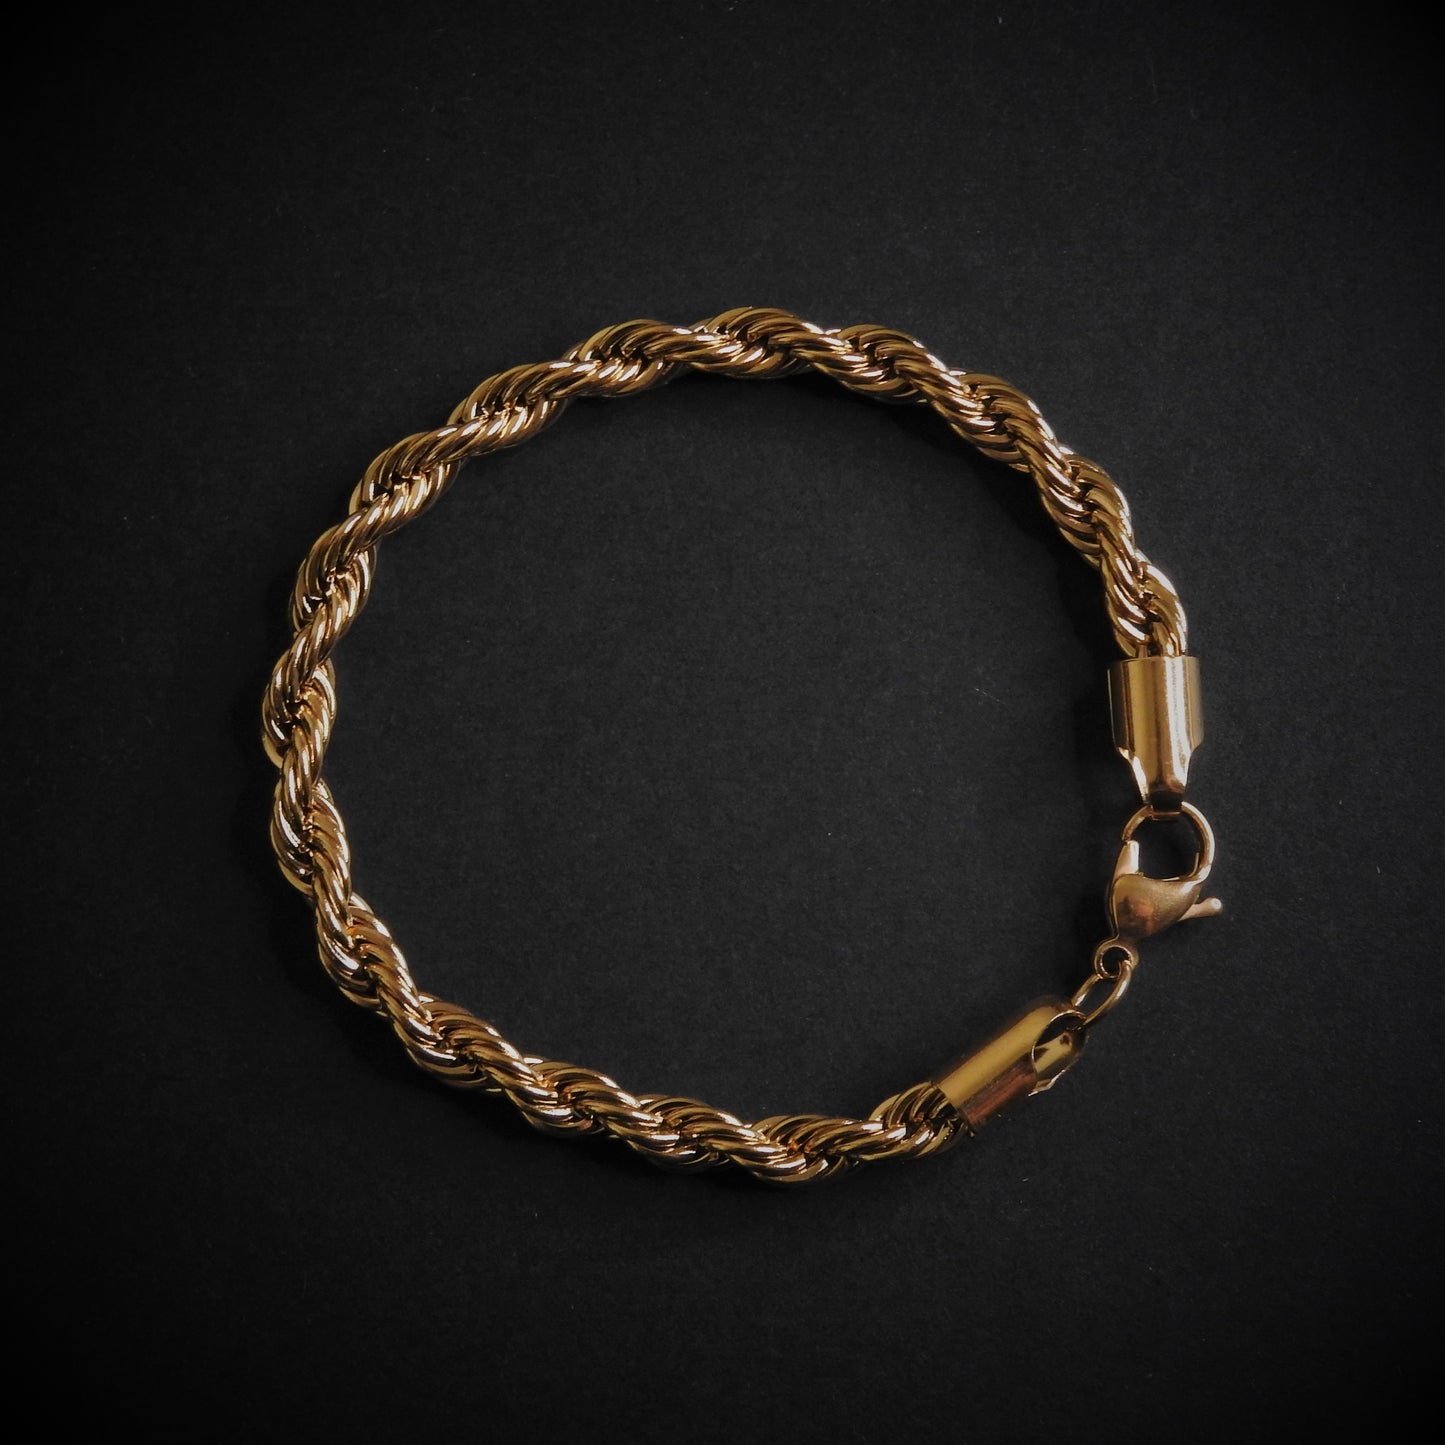 Rope chain + pulsera 6mm - Gold Dealers